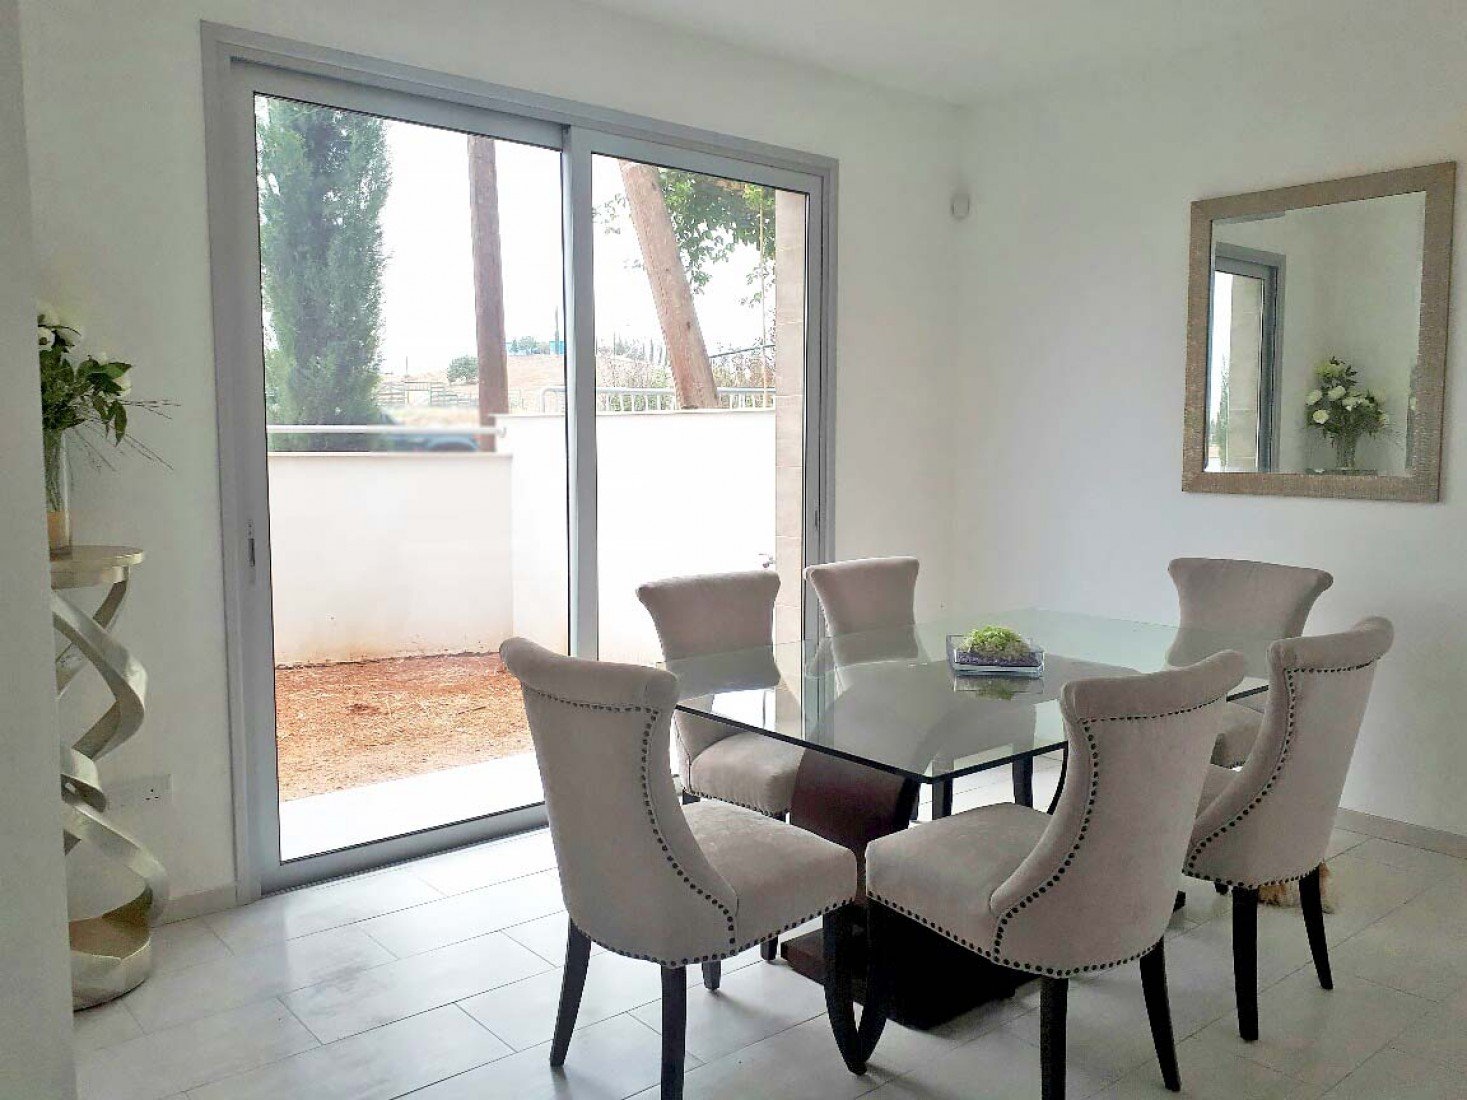 House for sale in Limassol, Cyprus 293298858